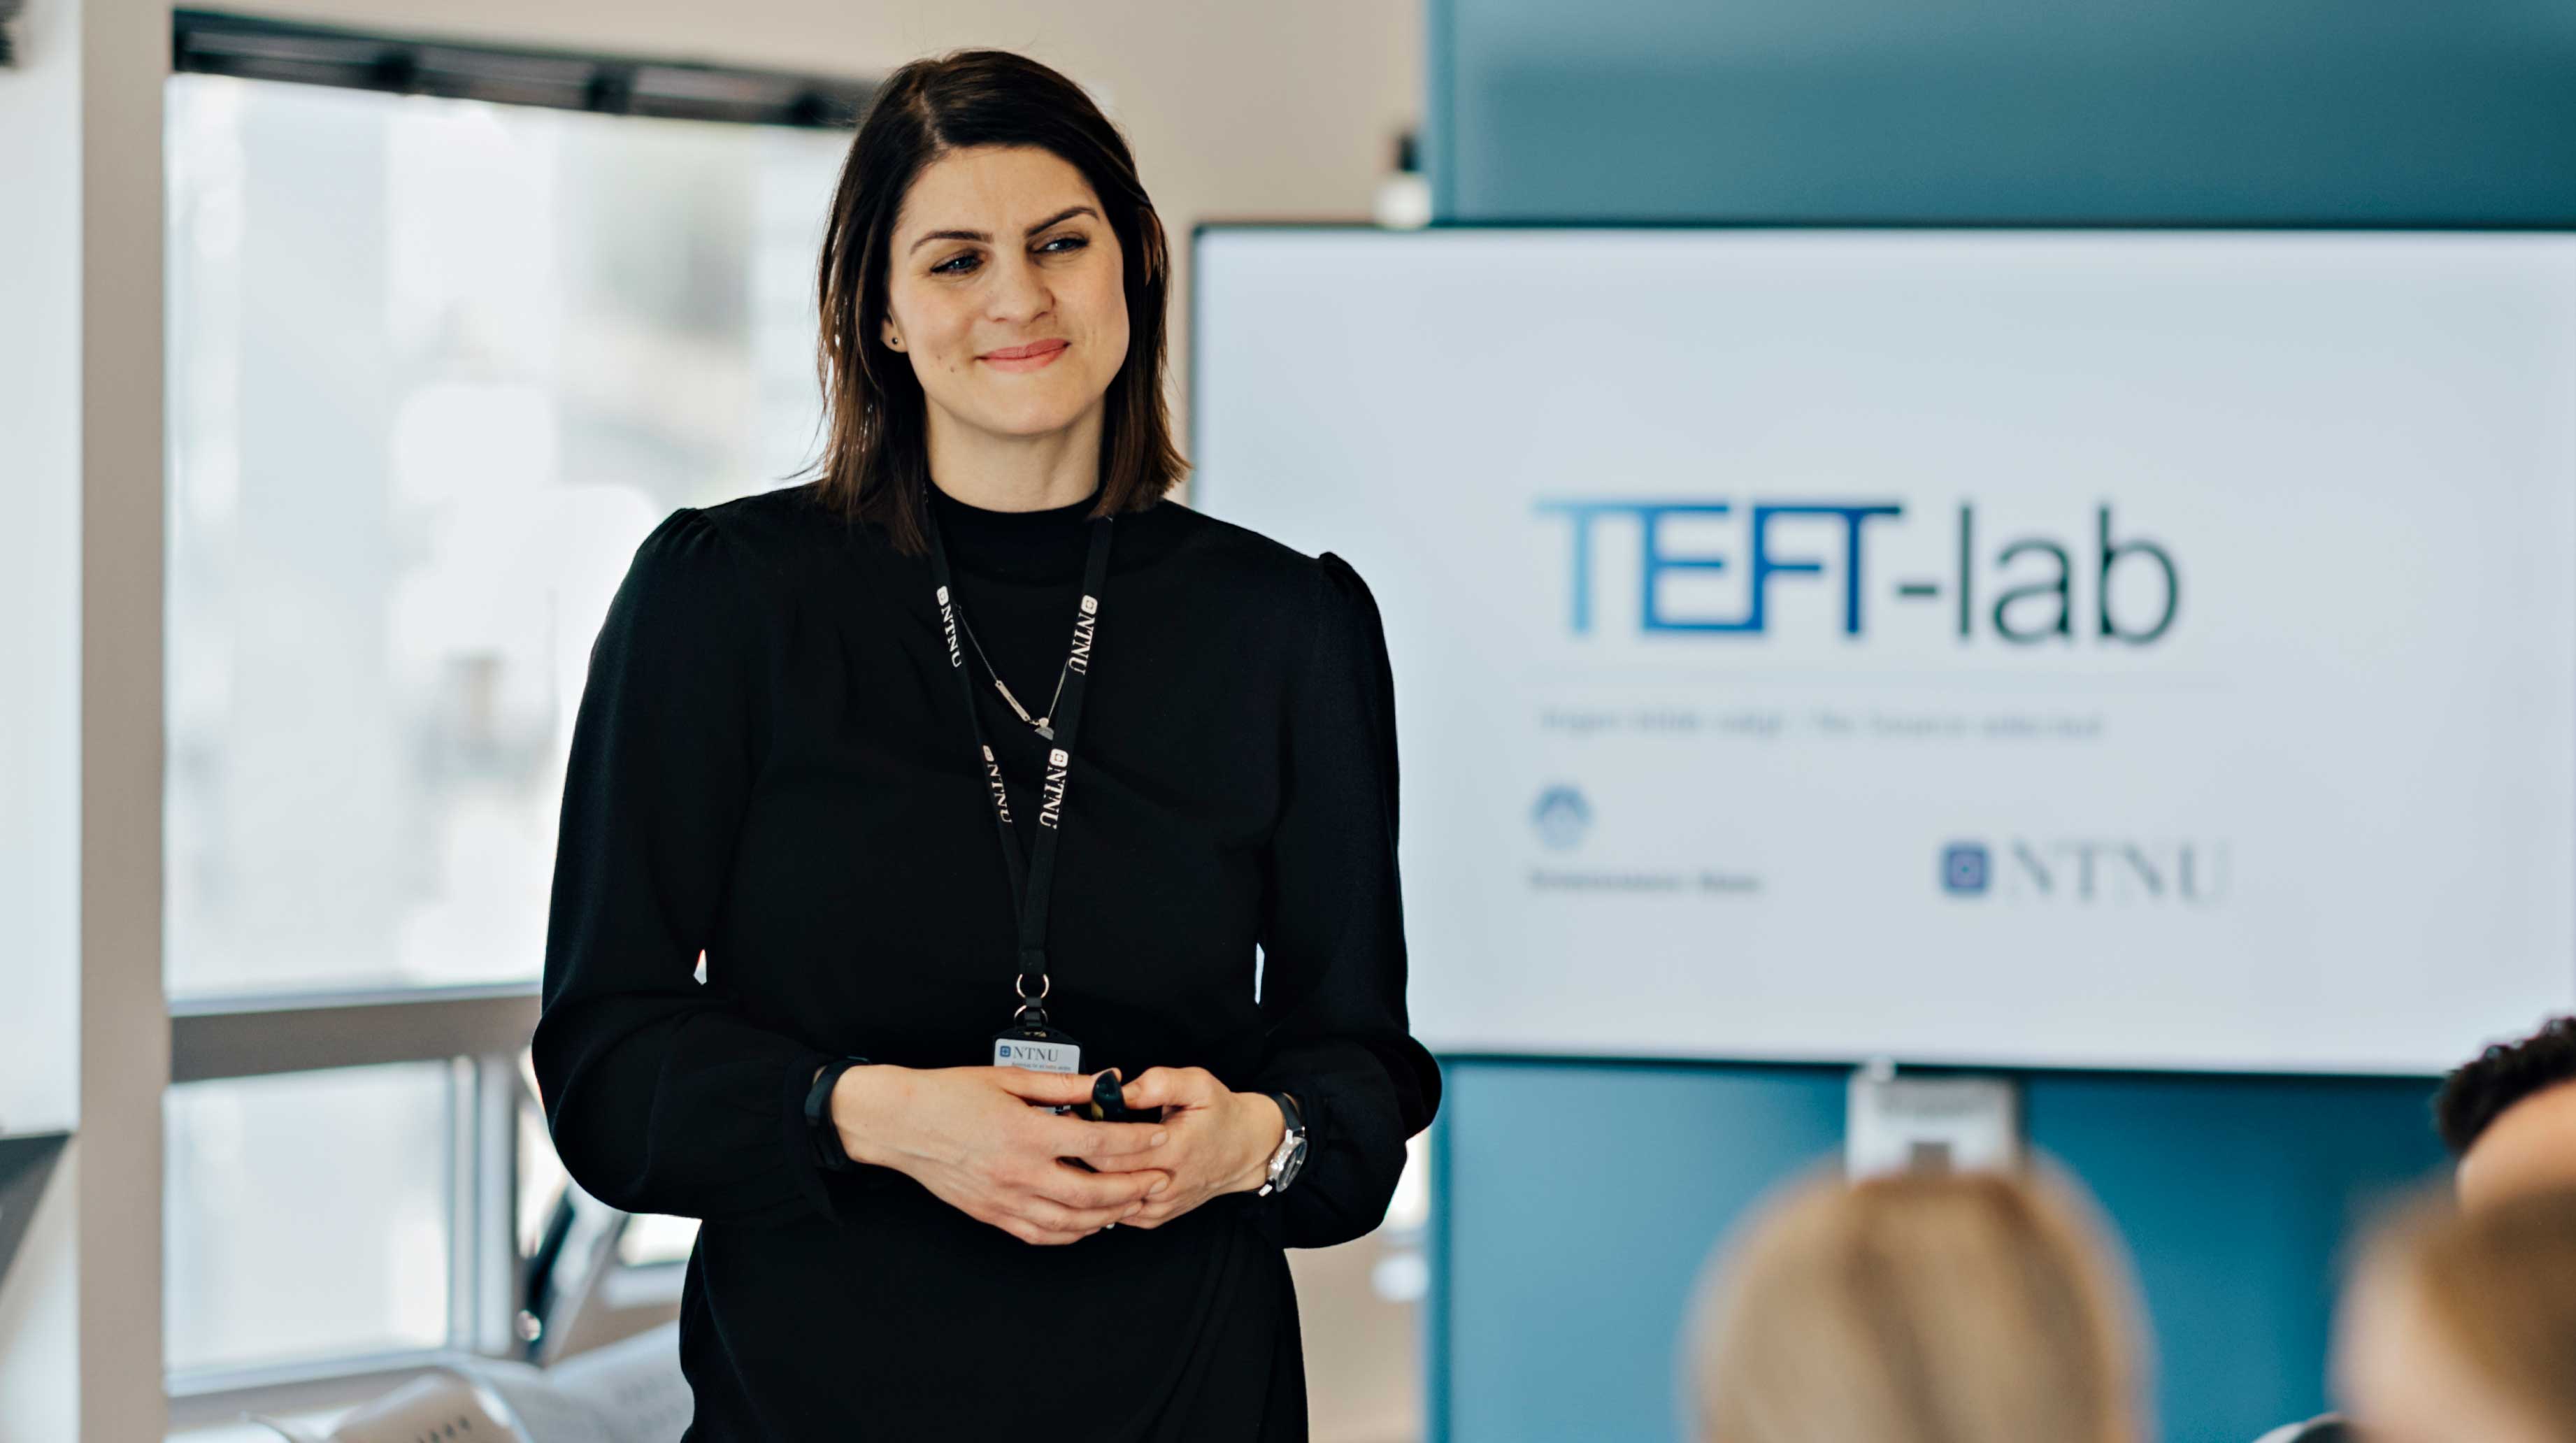 Woman standing in front of screen that says TEFT-lab